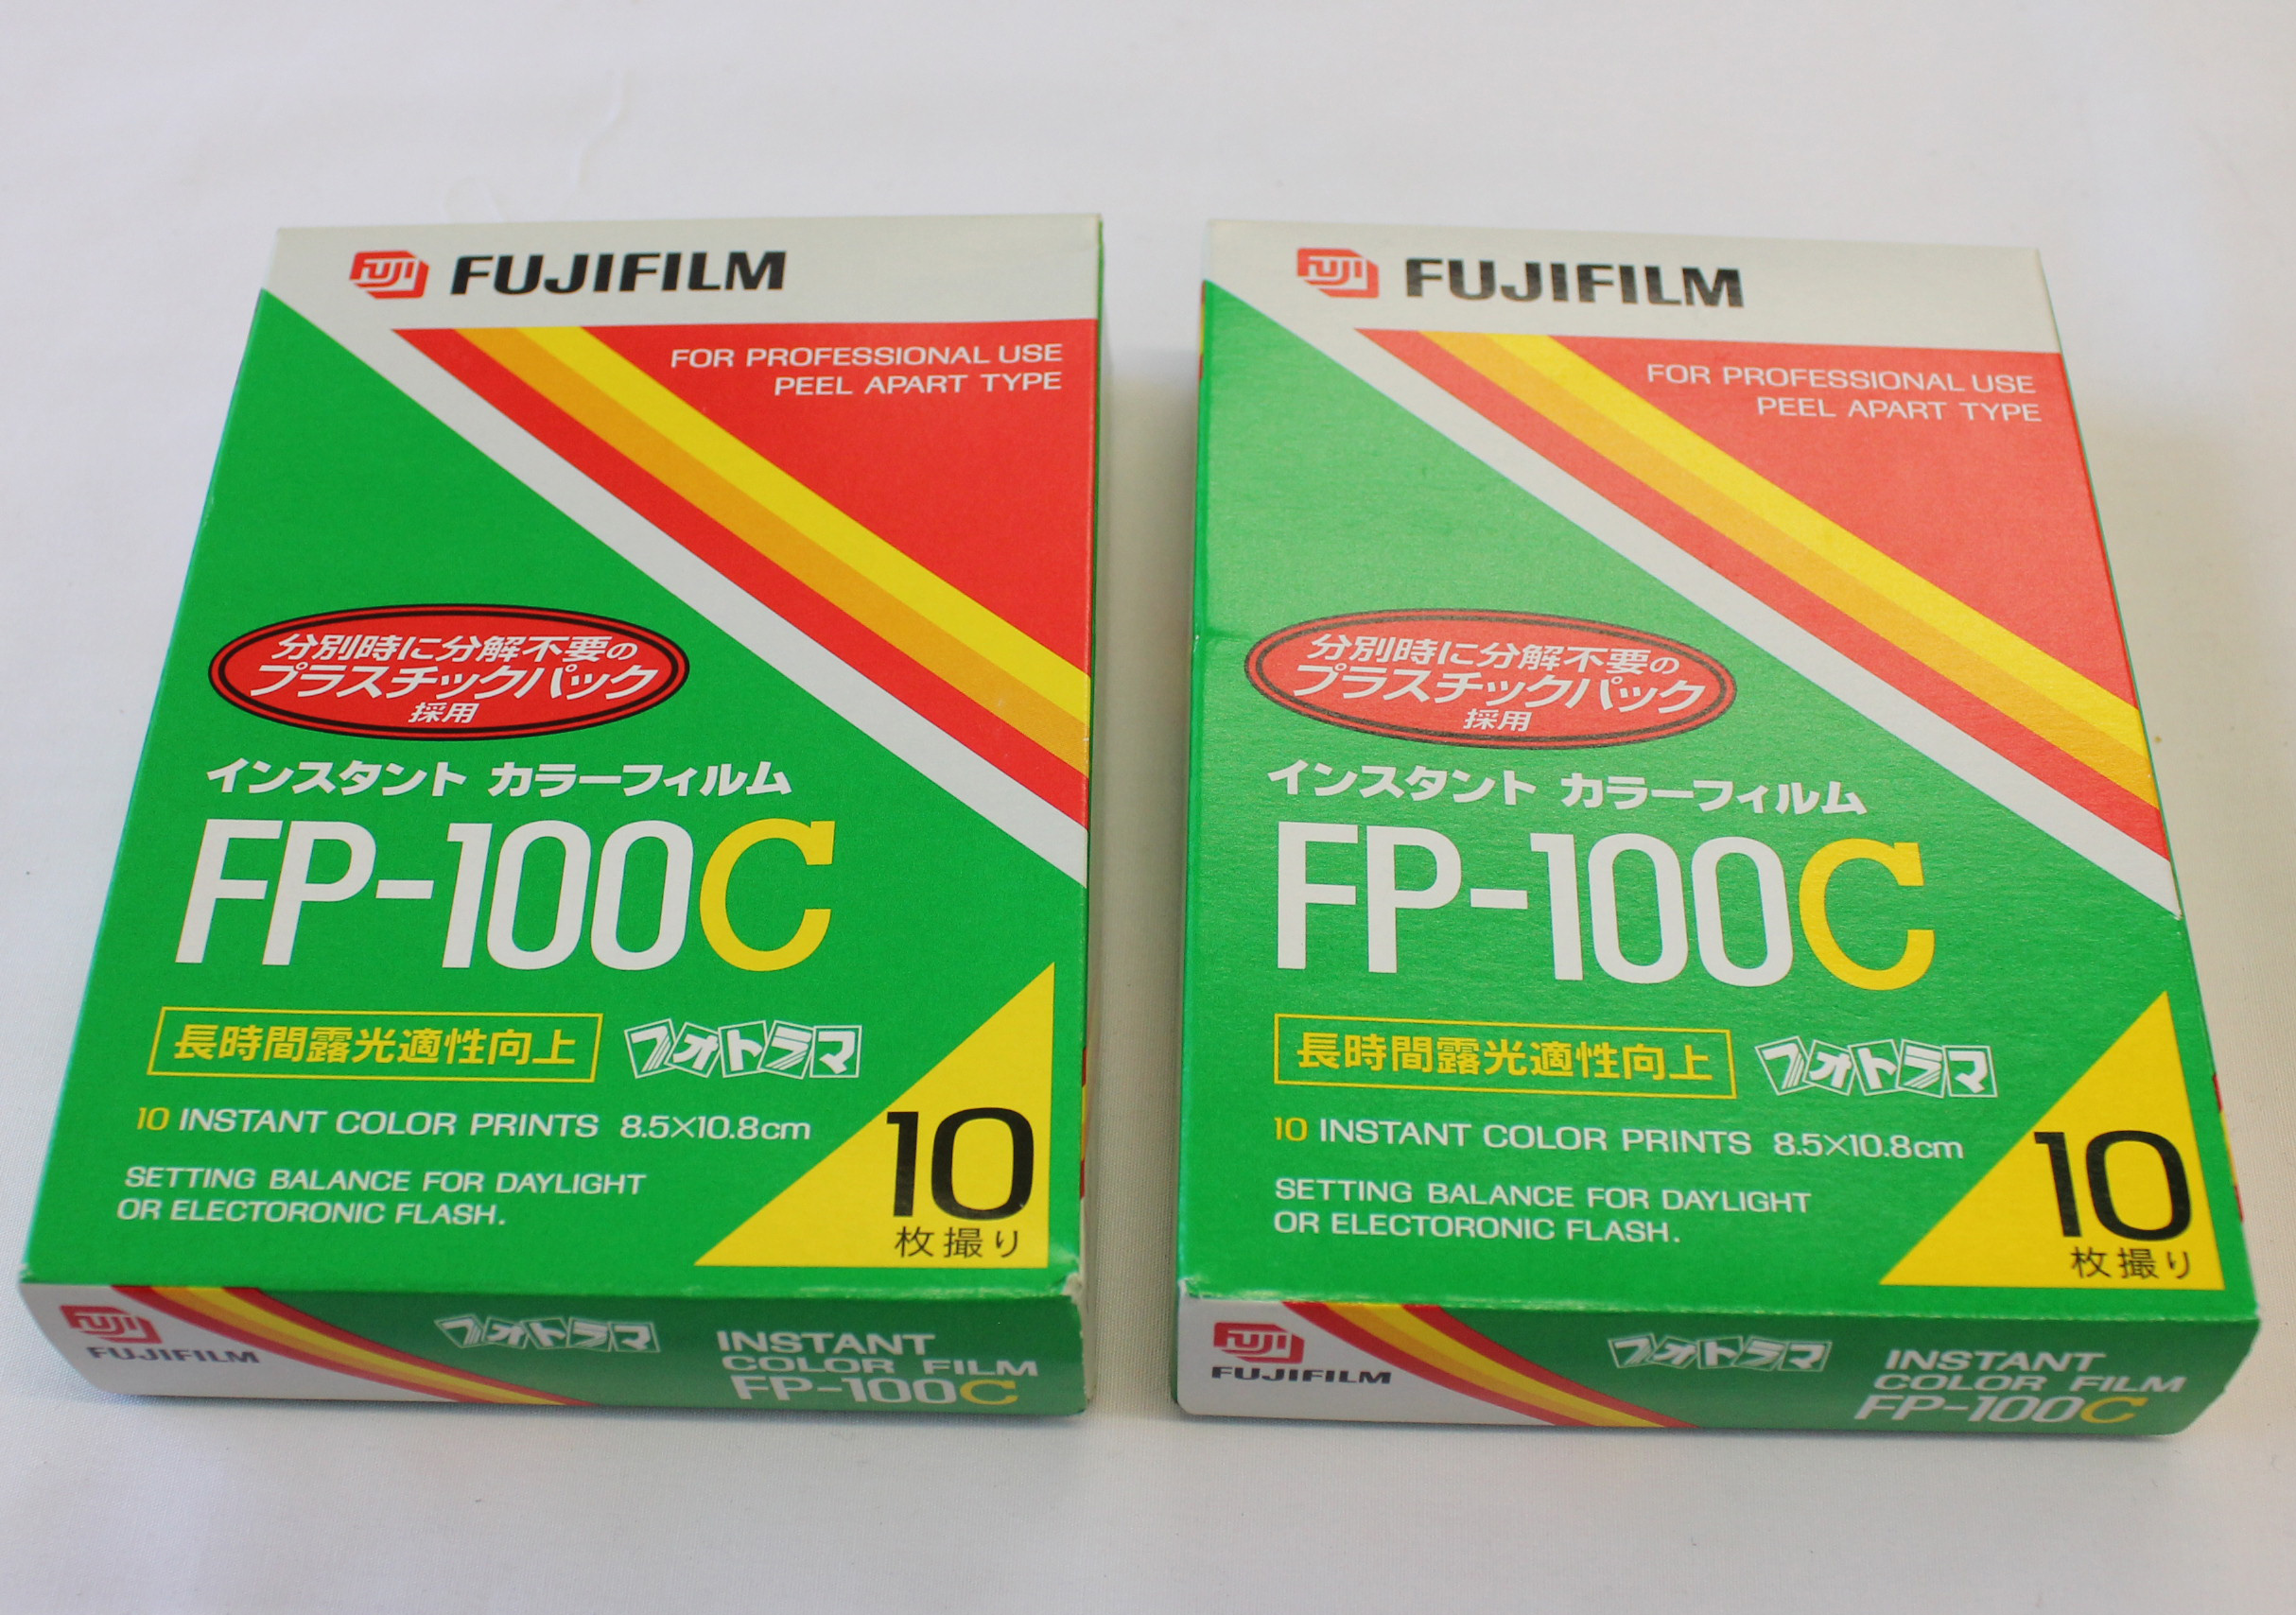 Japan Used Camera Shop | [New] Fujifilm FP-100C Instant Color Film Set of 2 (Expired) from Japan